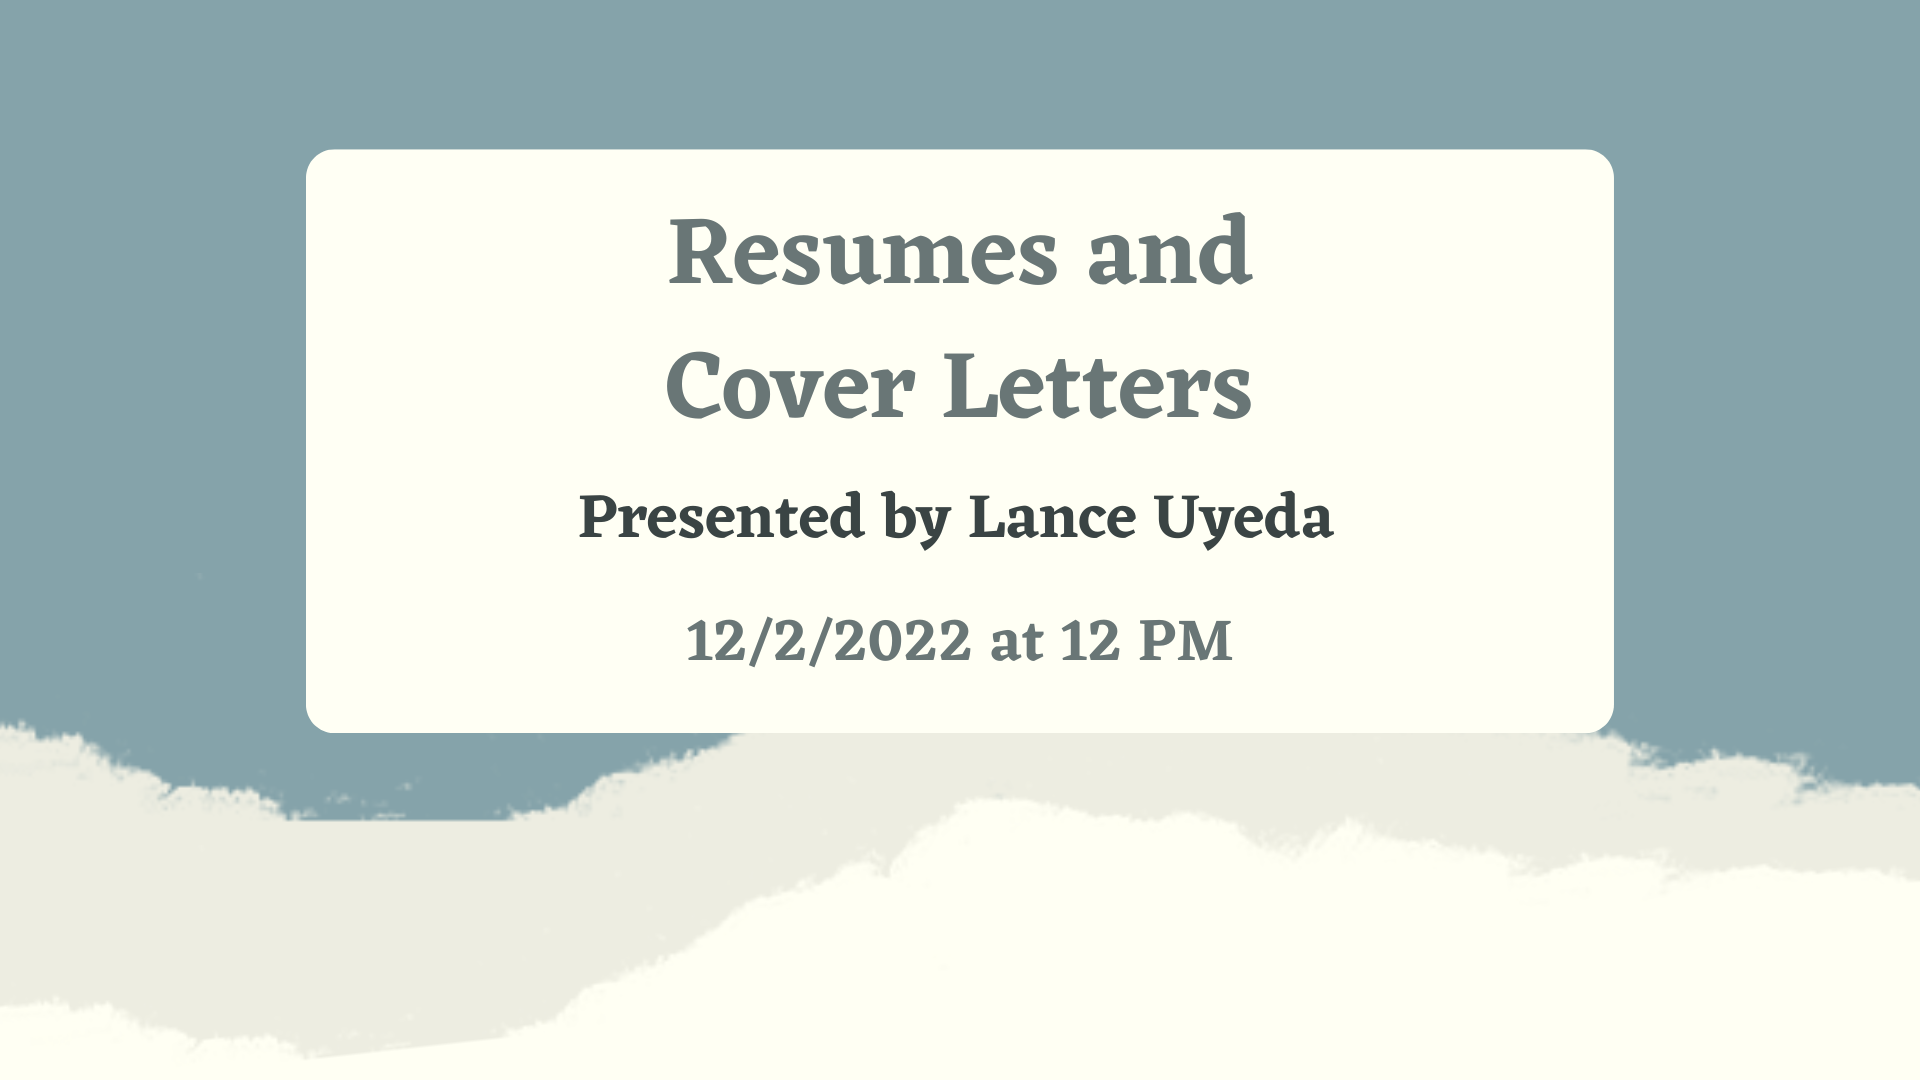 Resumes and cover letters - presented by Lance Uyeda